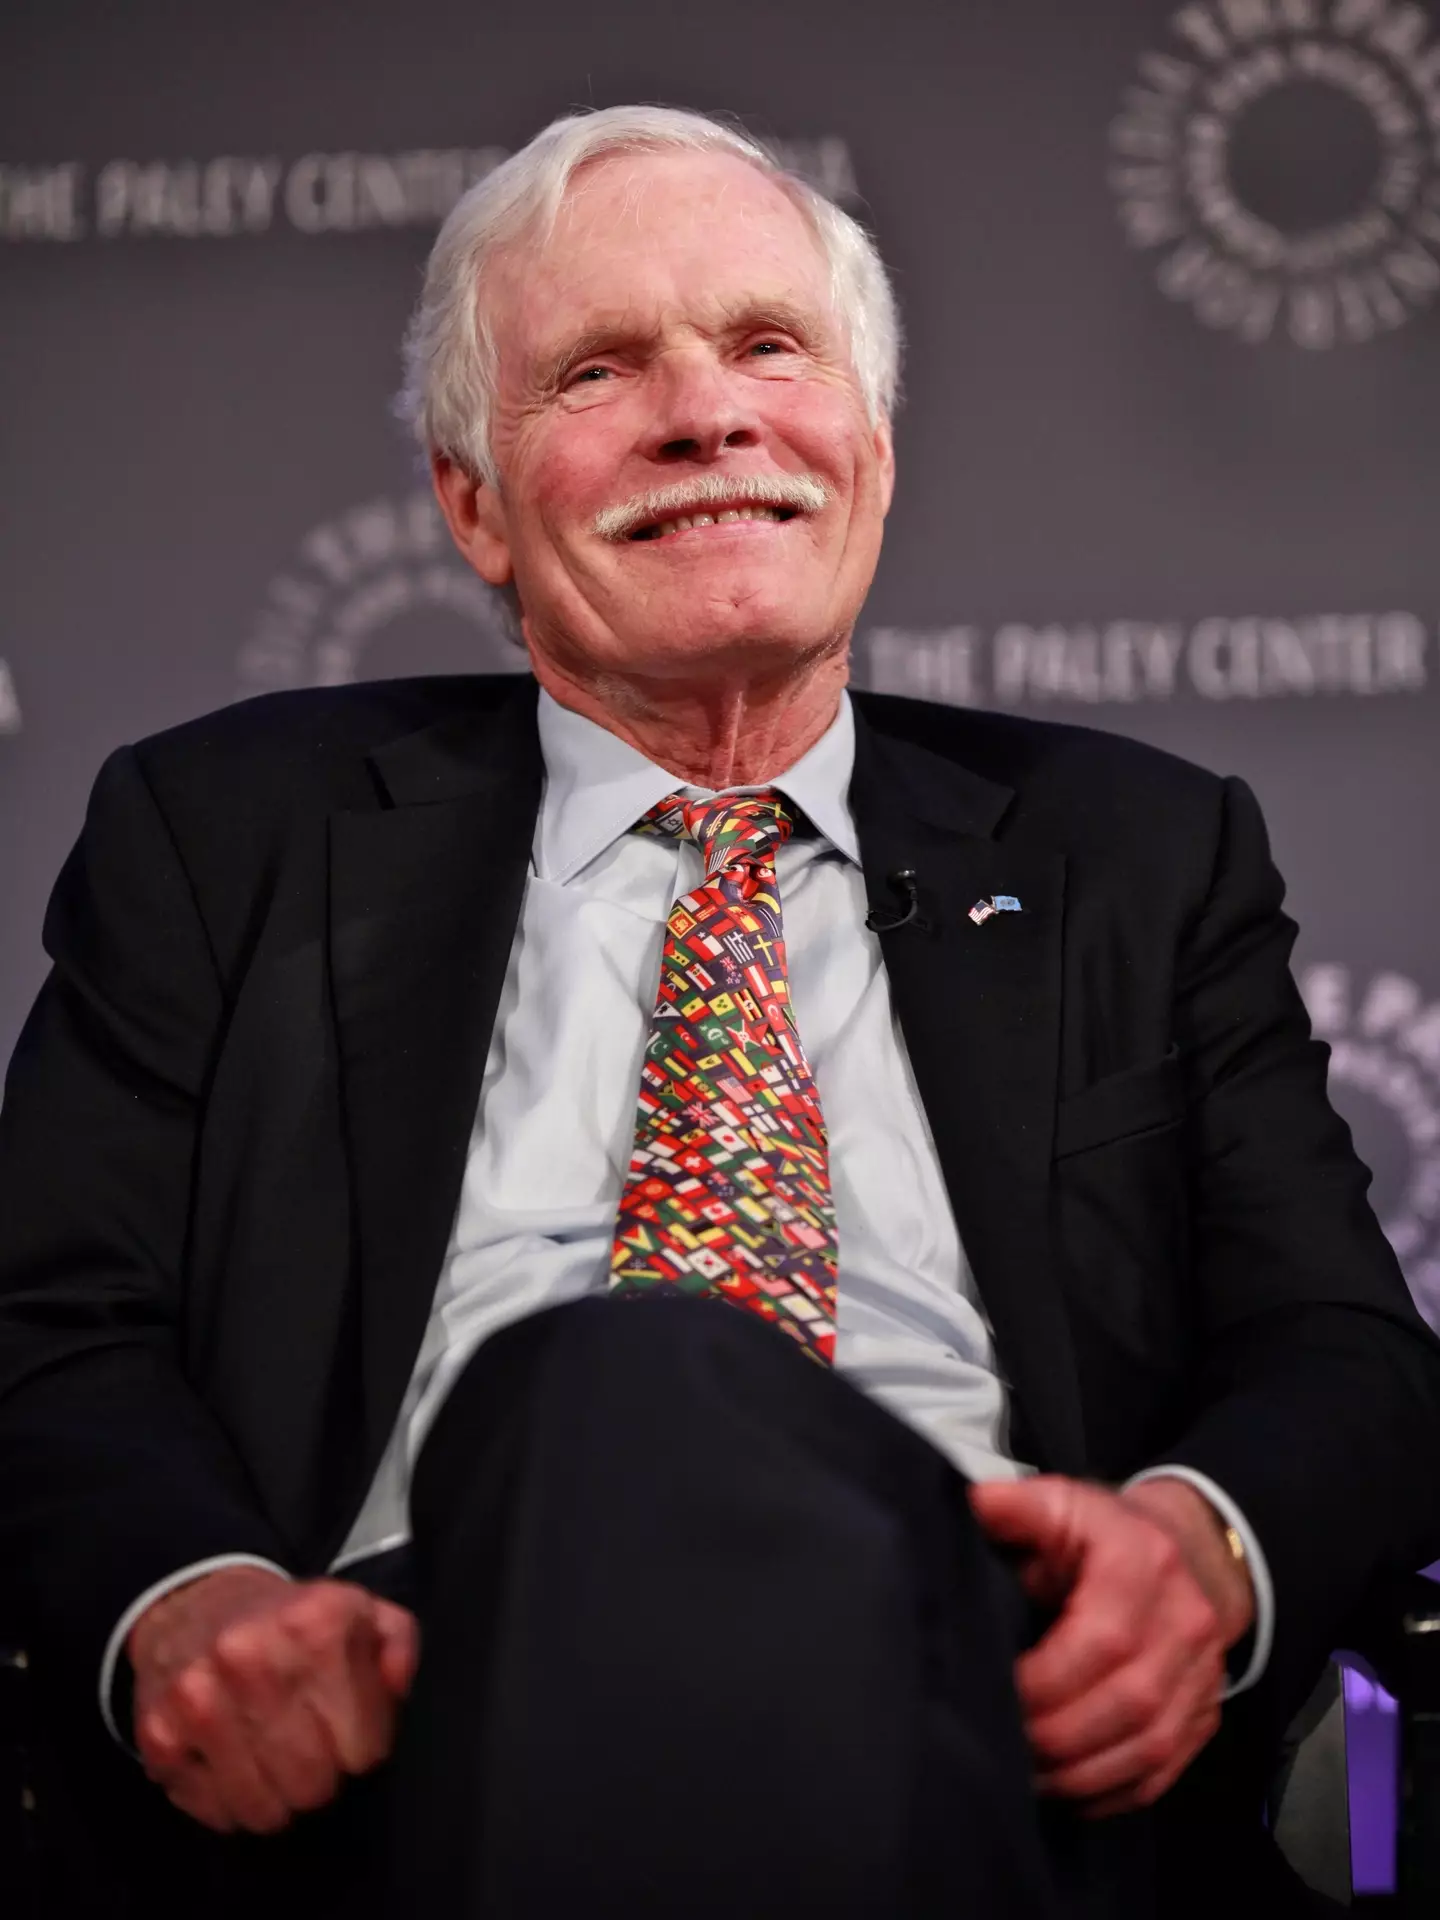 CNN founder Ted Turner had the video made in the 1980s.